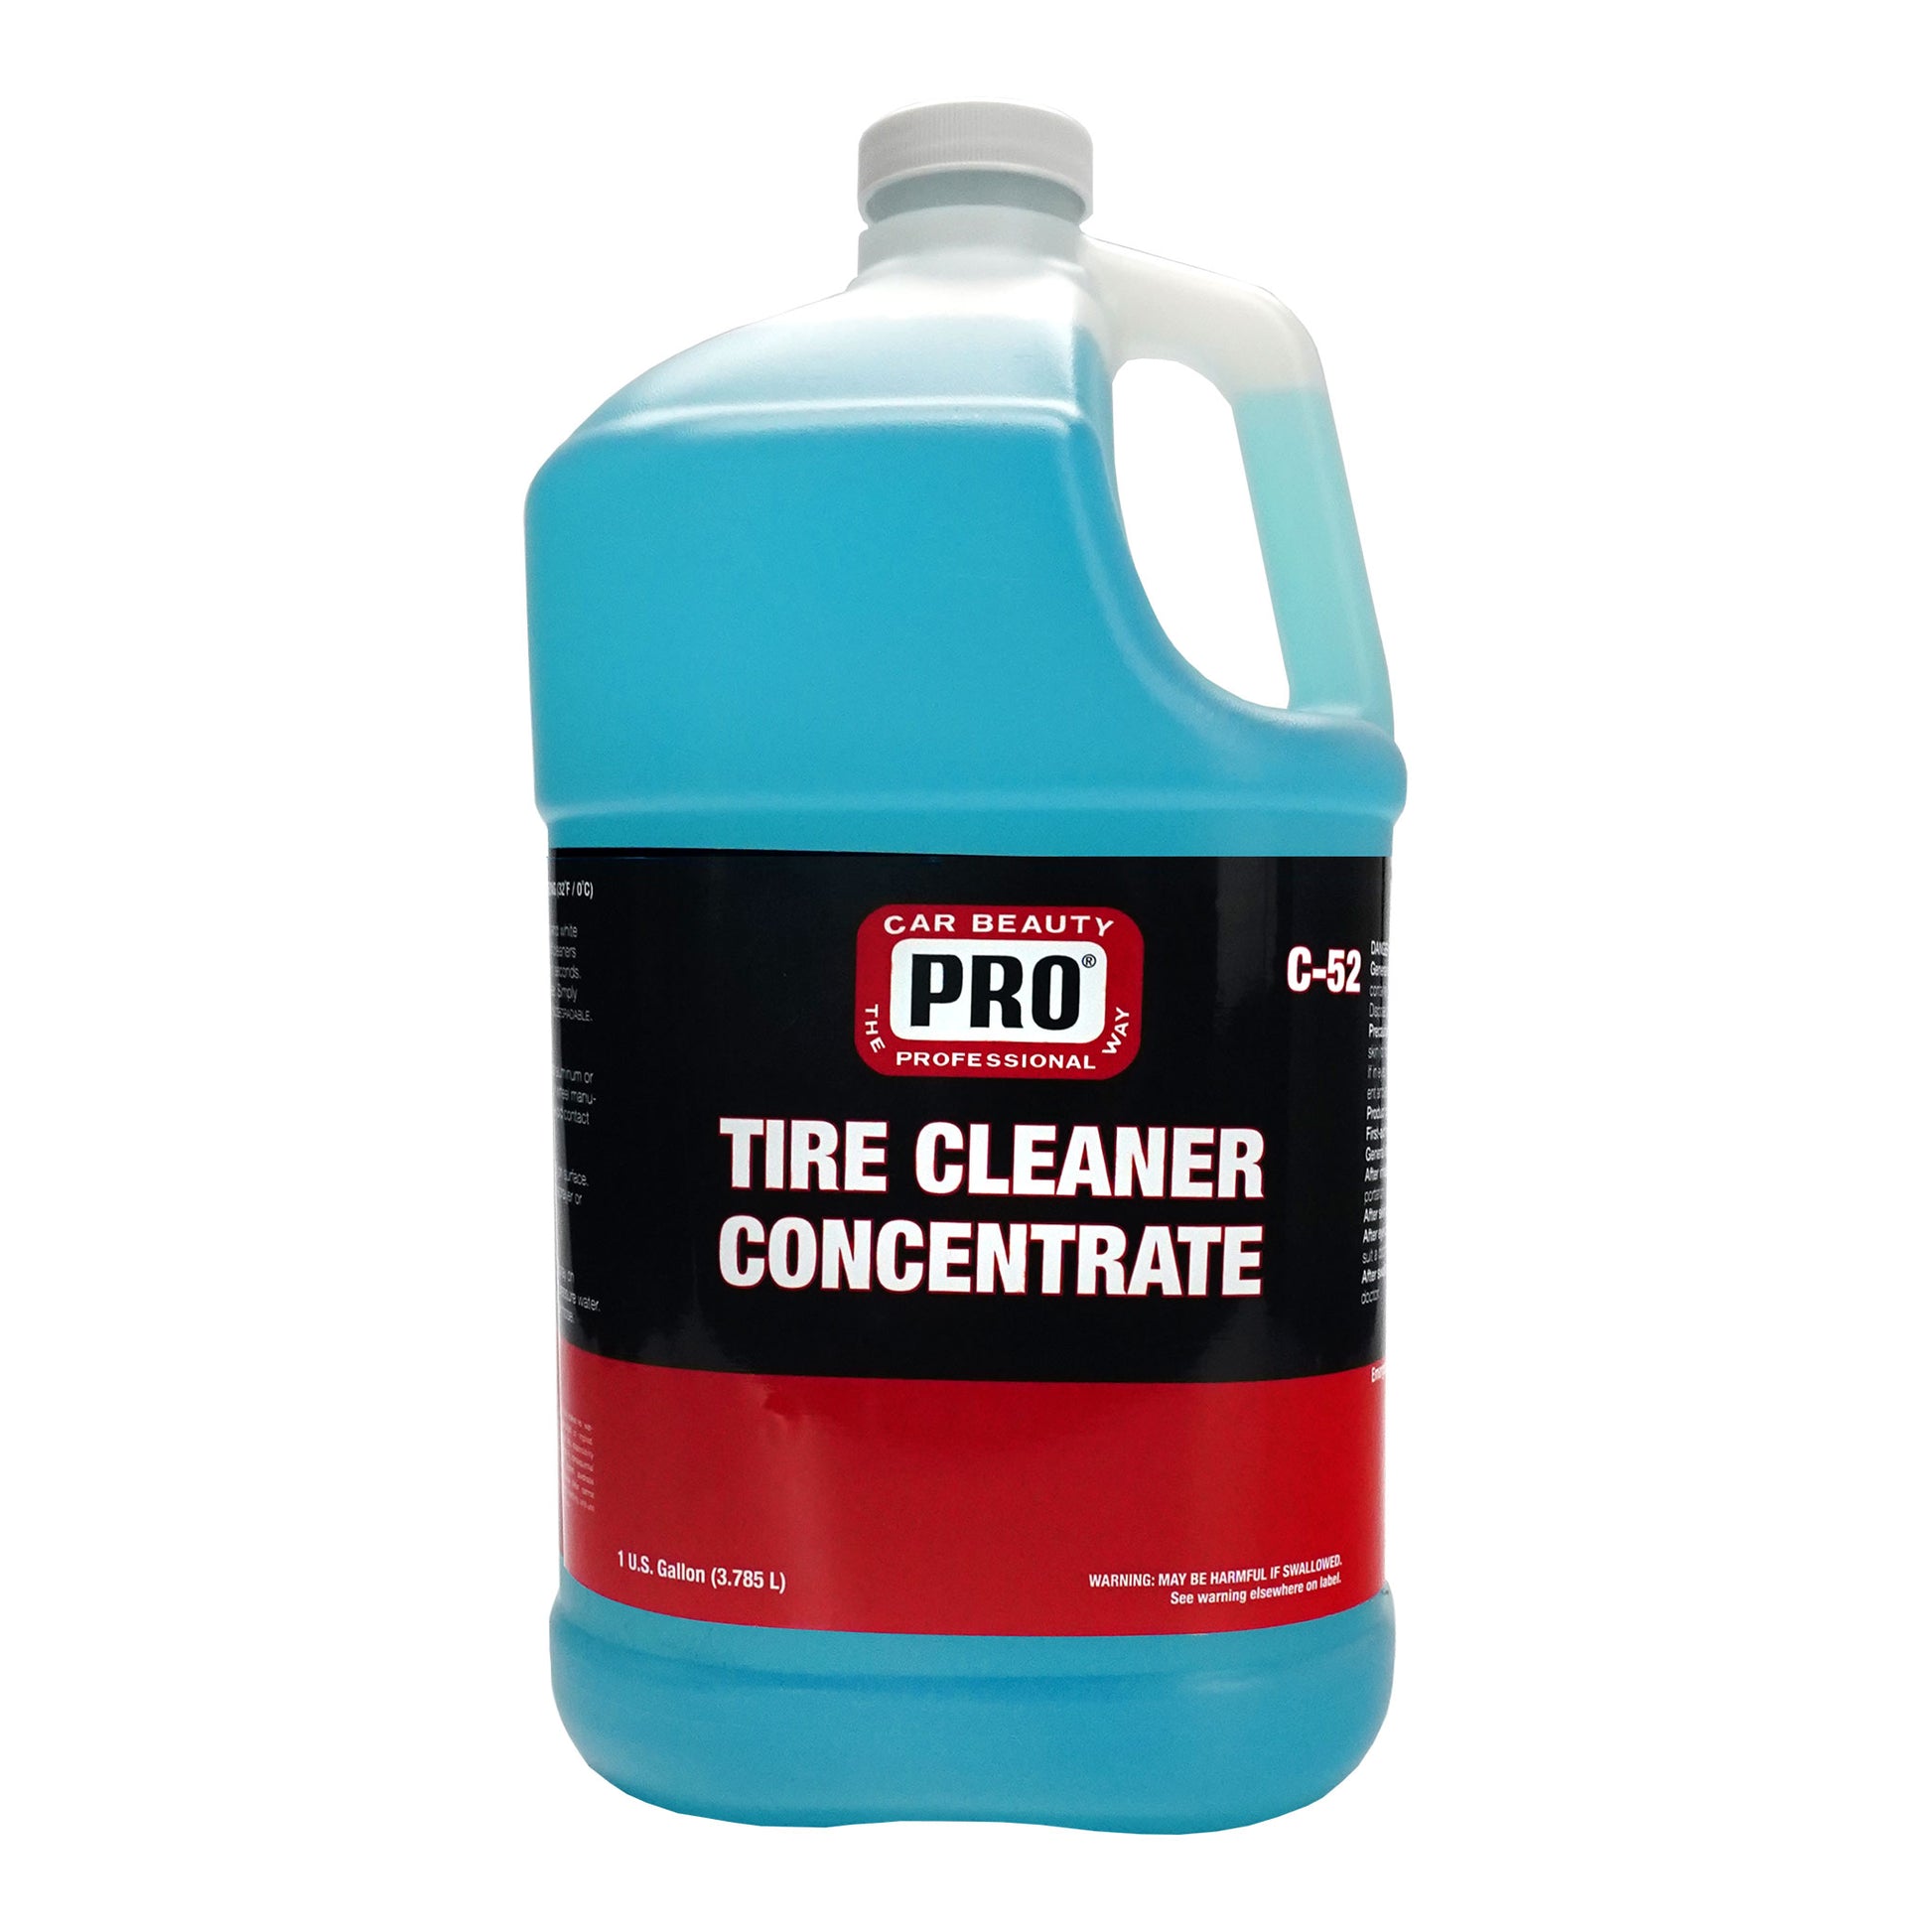 Tire Cleaner Concentrate